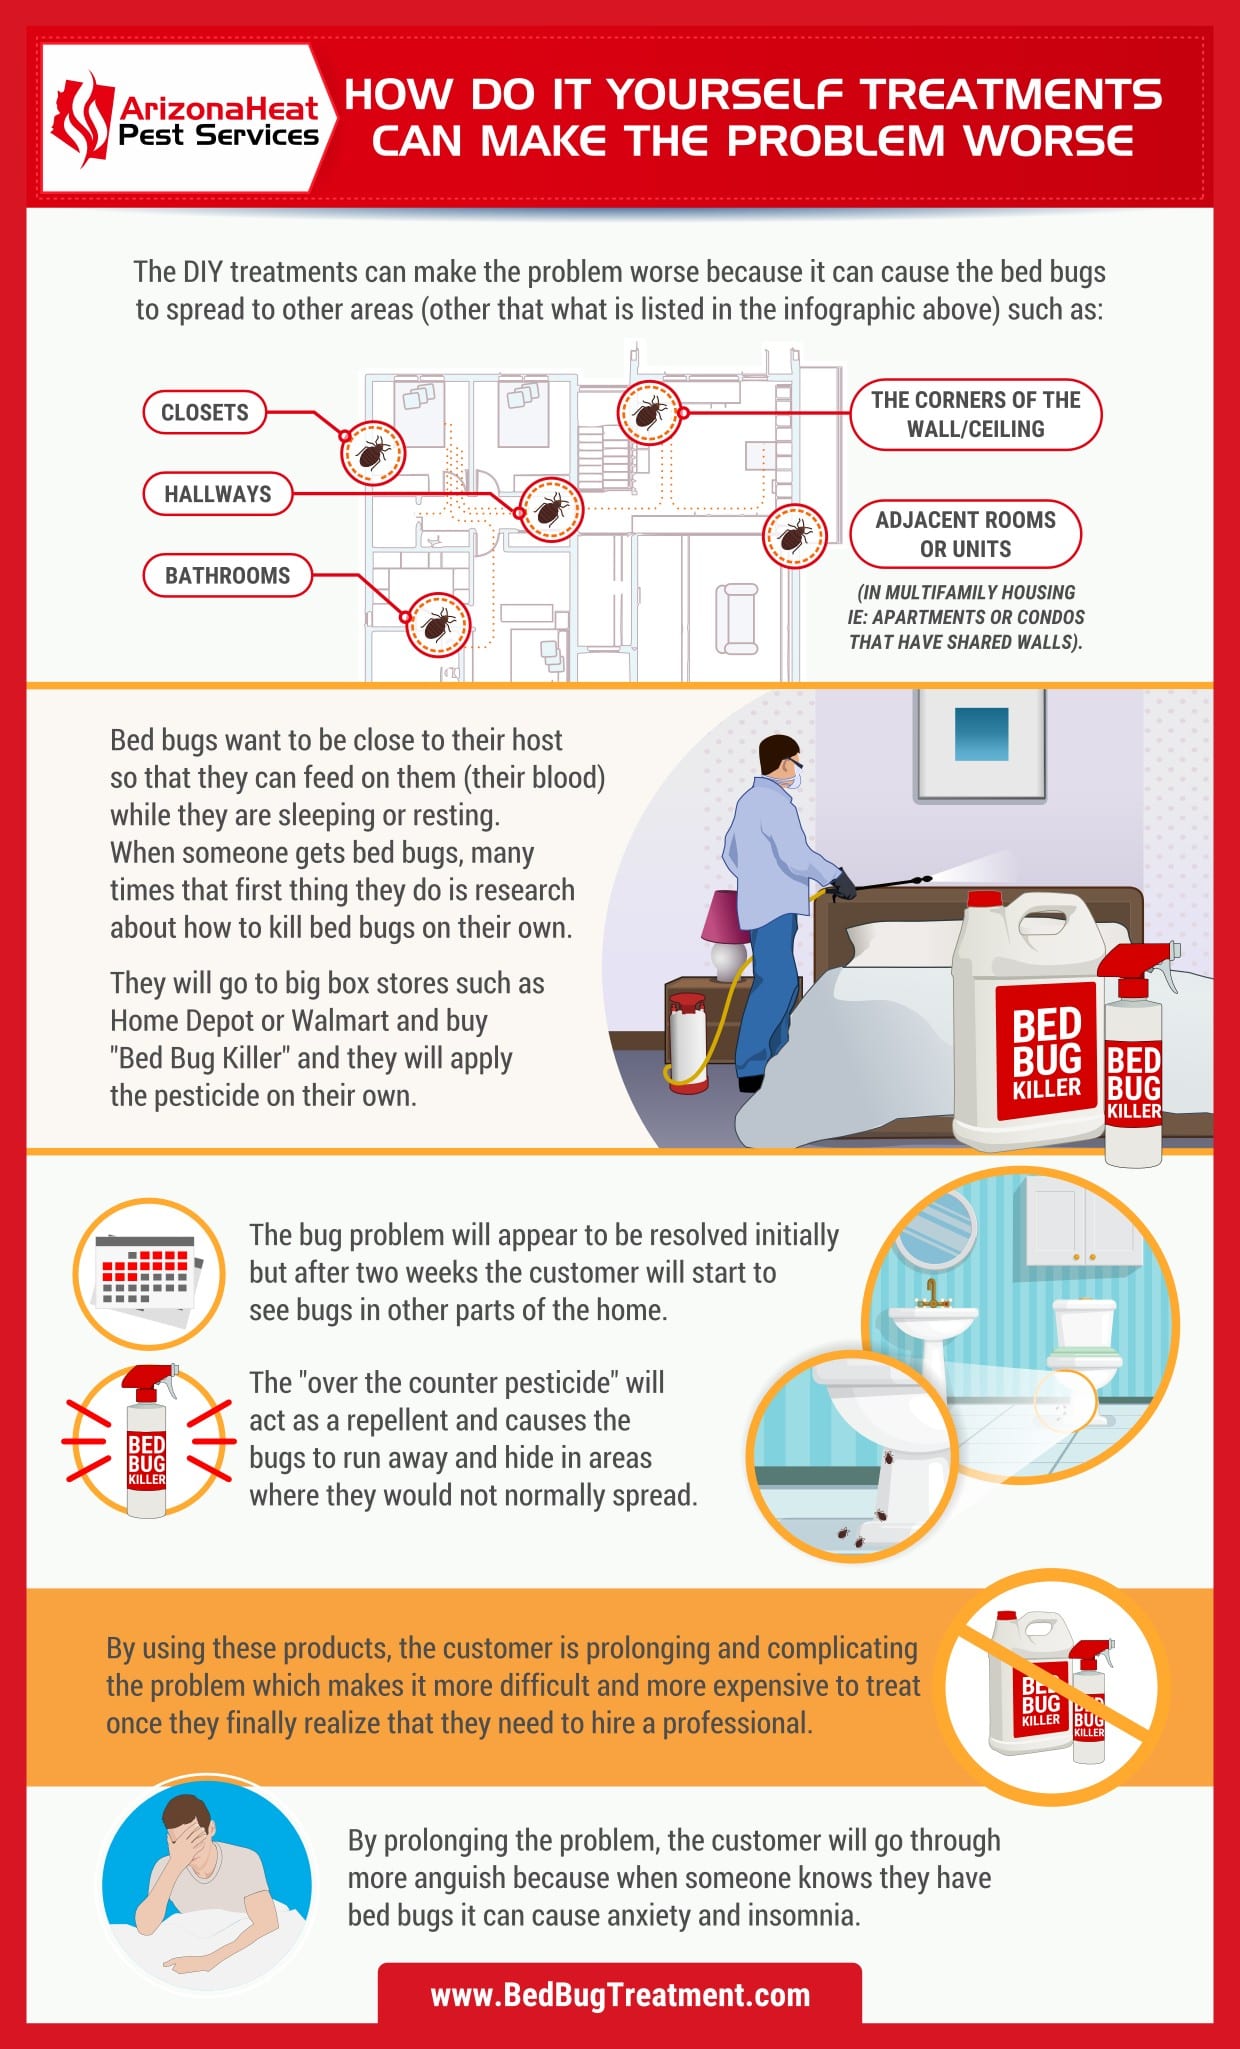 diy bed bug treatment not advised heat treatment is the best option infographic